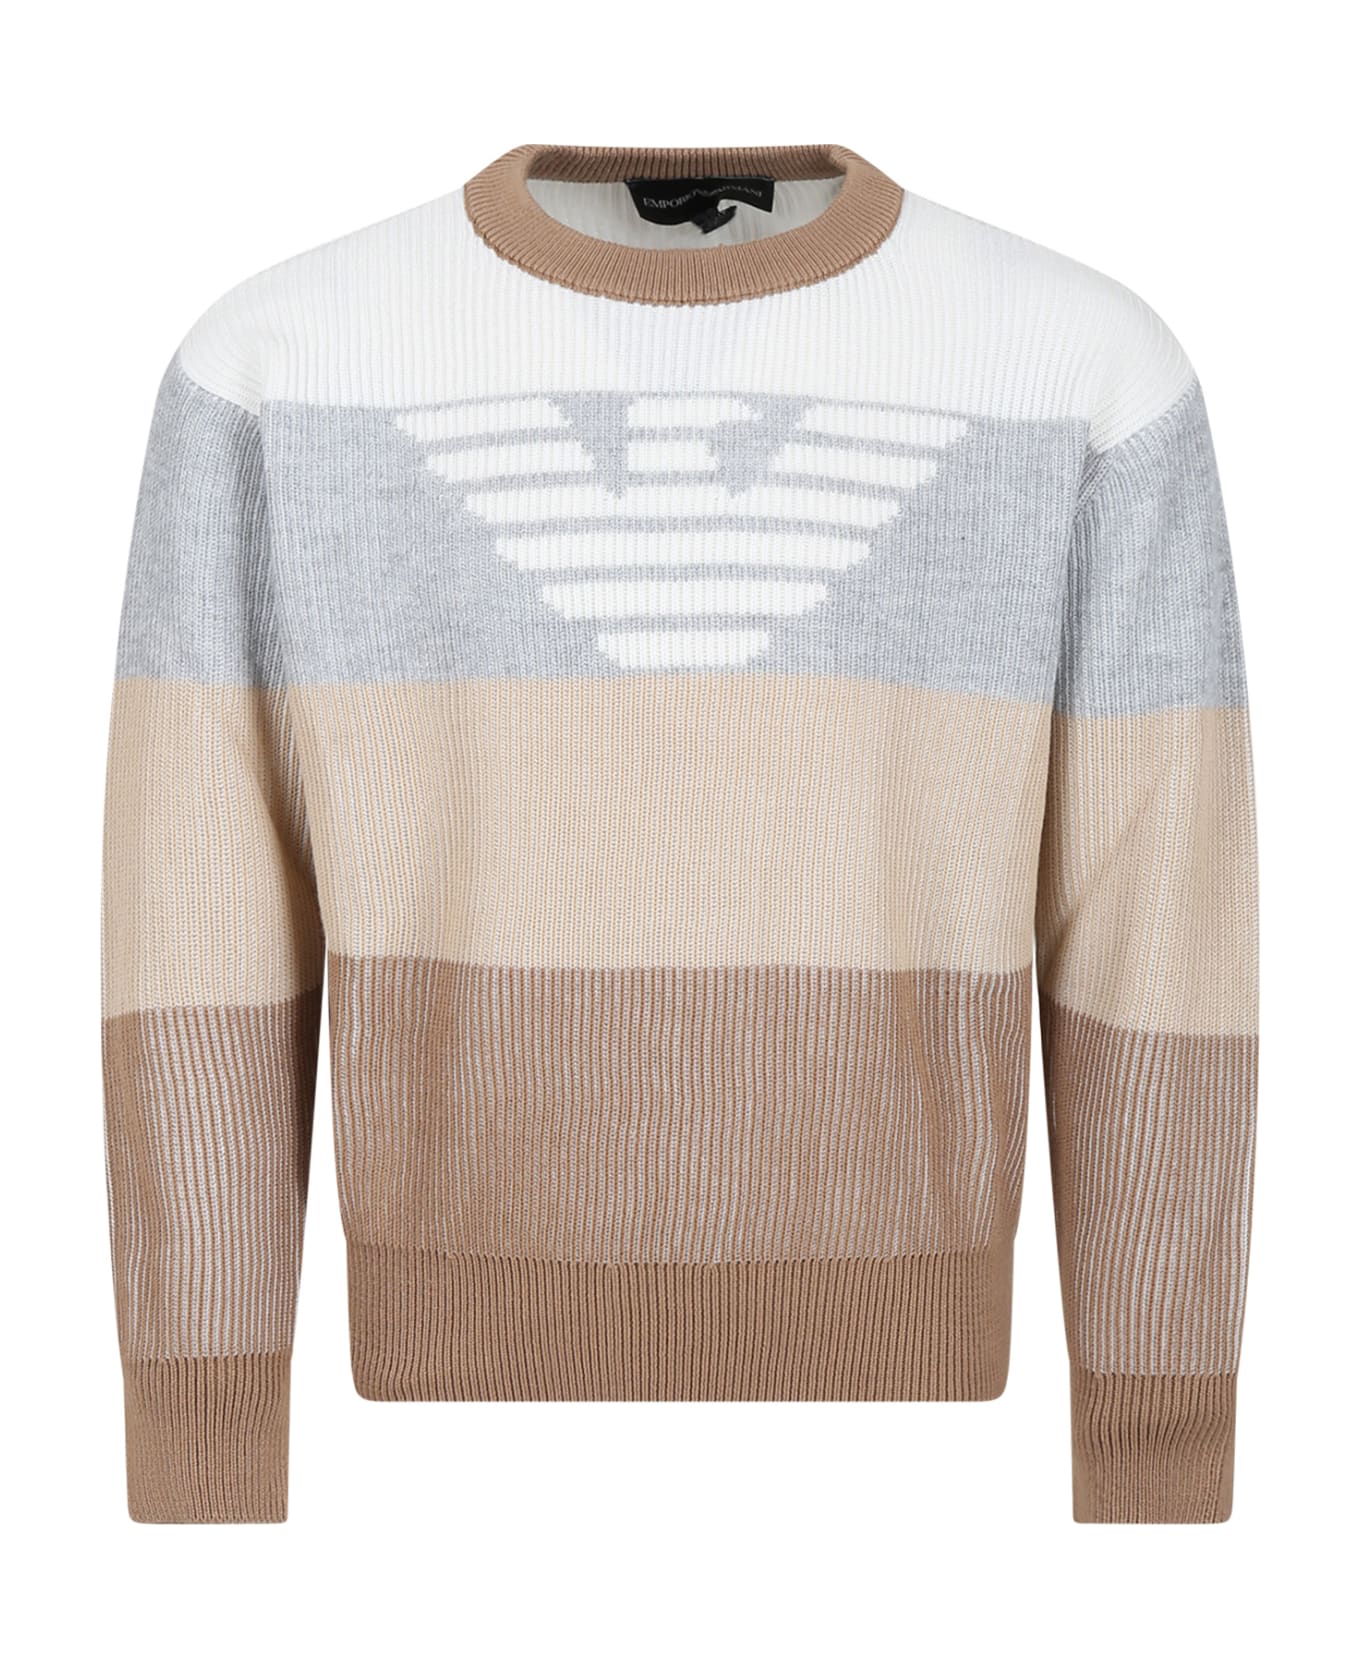 Emporio Armani Multicolor Sweater For Boy With Eaglet - Vanise' Beige